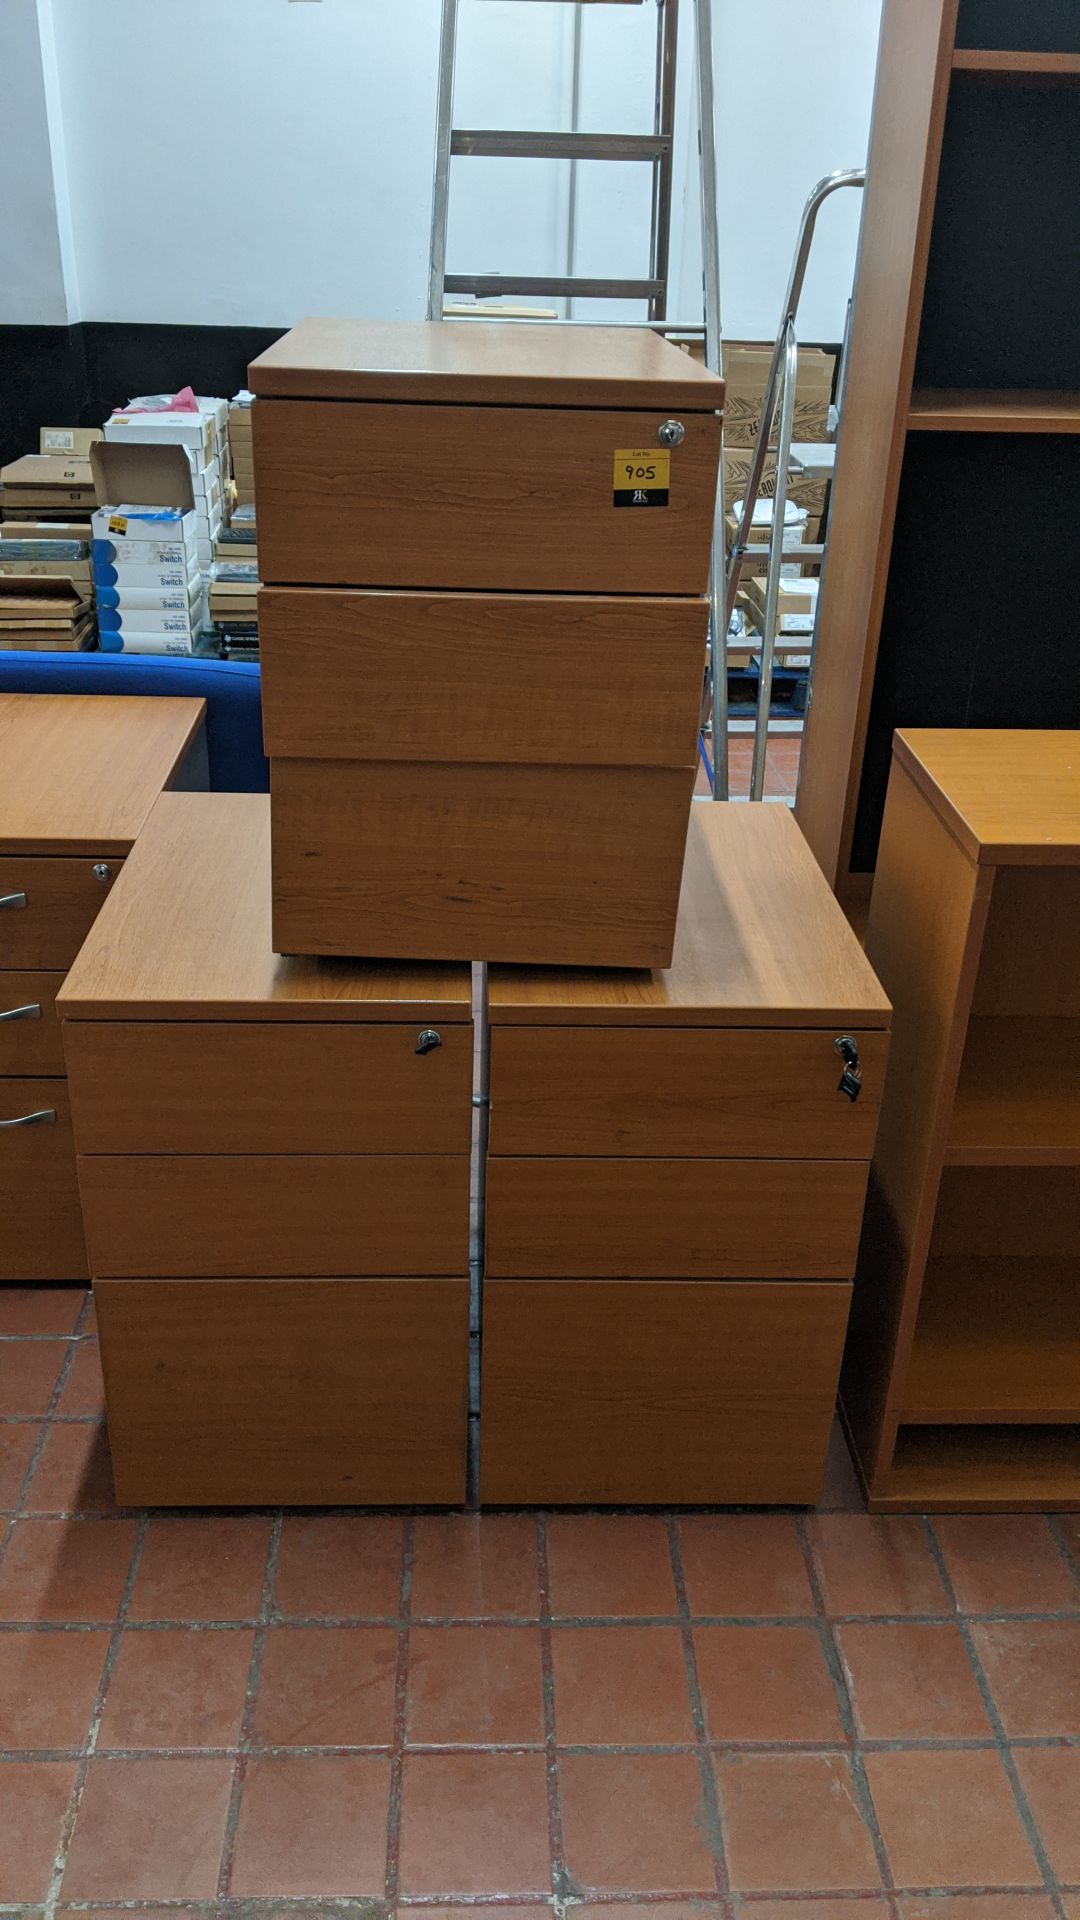 3 off desk pedestals to match the bulk of the other office furniture in this sale - comprises 1